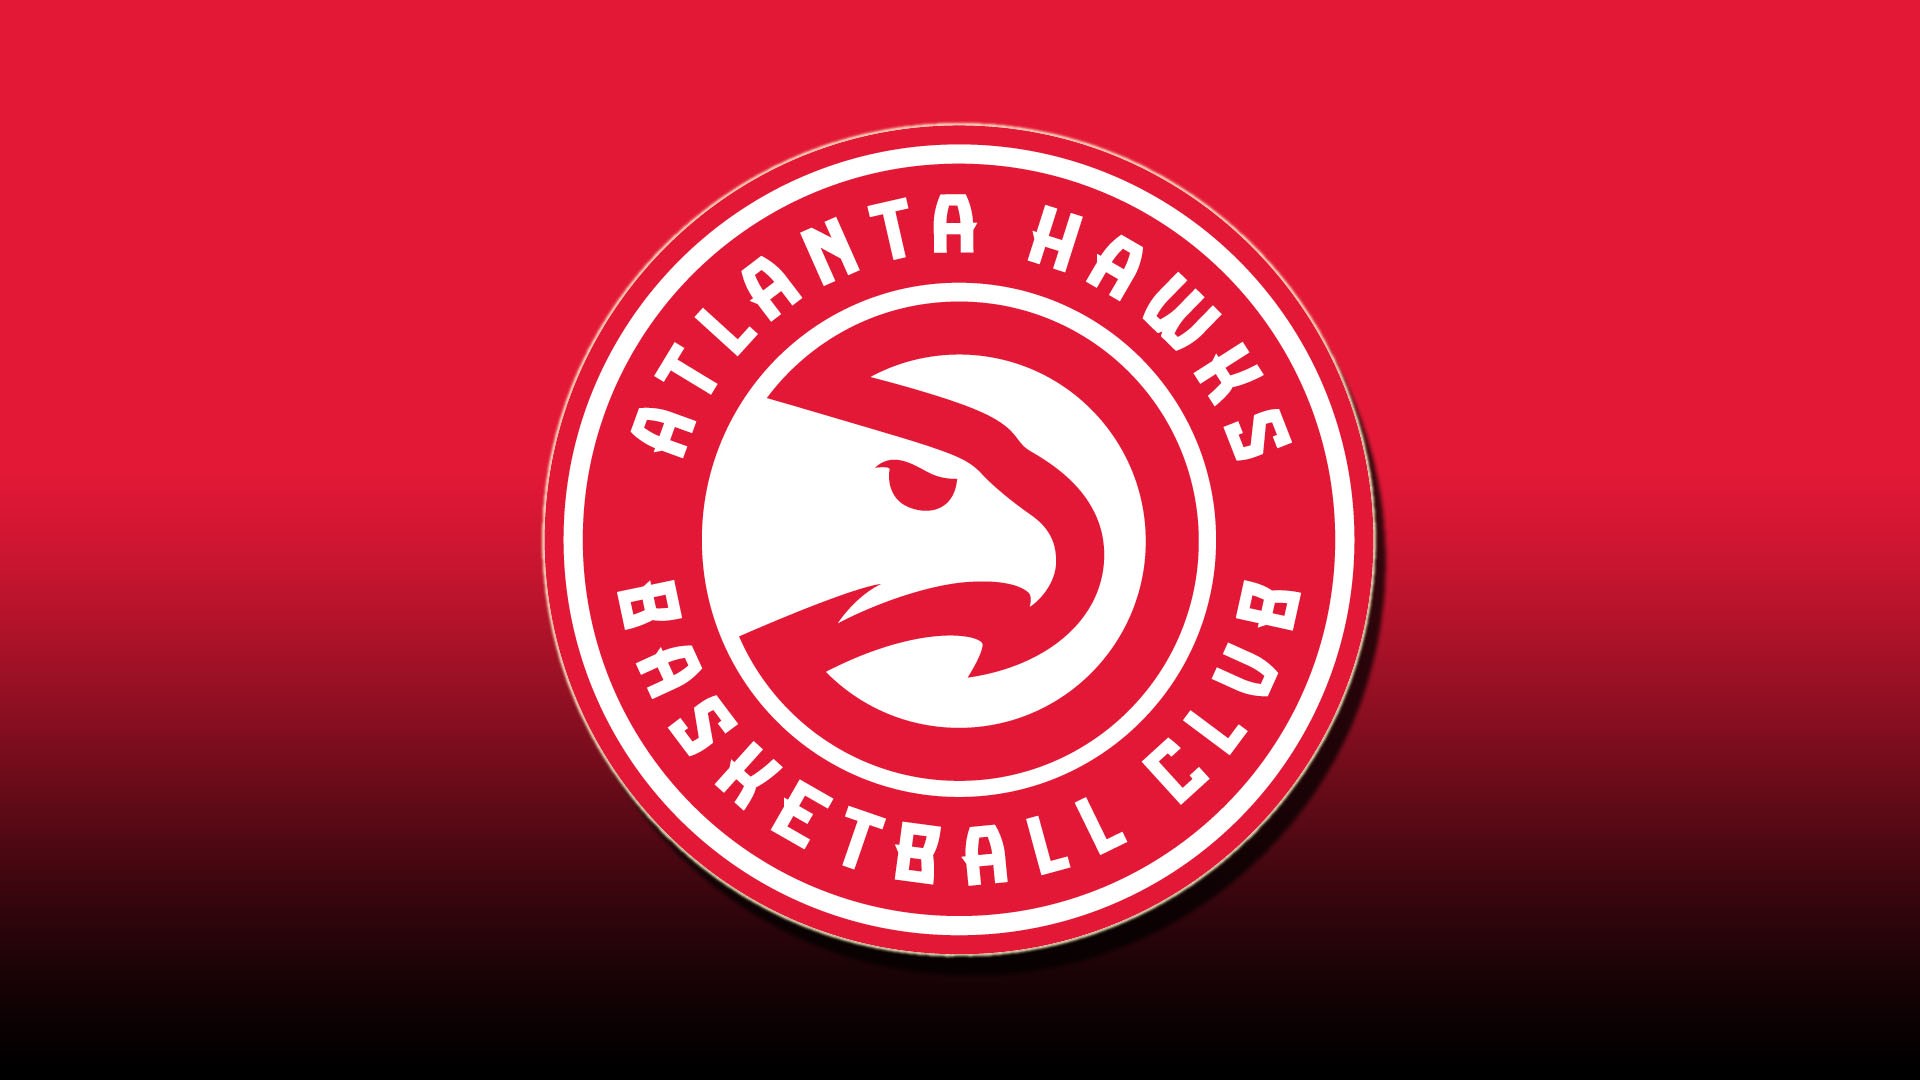 HD Desktop Wallpaper Atlanta Hawks with image dimensions 1920x1080 pixel. You can make this wallpaper for your Desktop Computer Backgrounds, Windows or Mac Screensavers, iPhone Lock screen, Tablet or Android and another Mobile Phone device